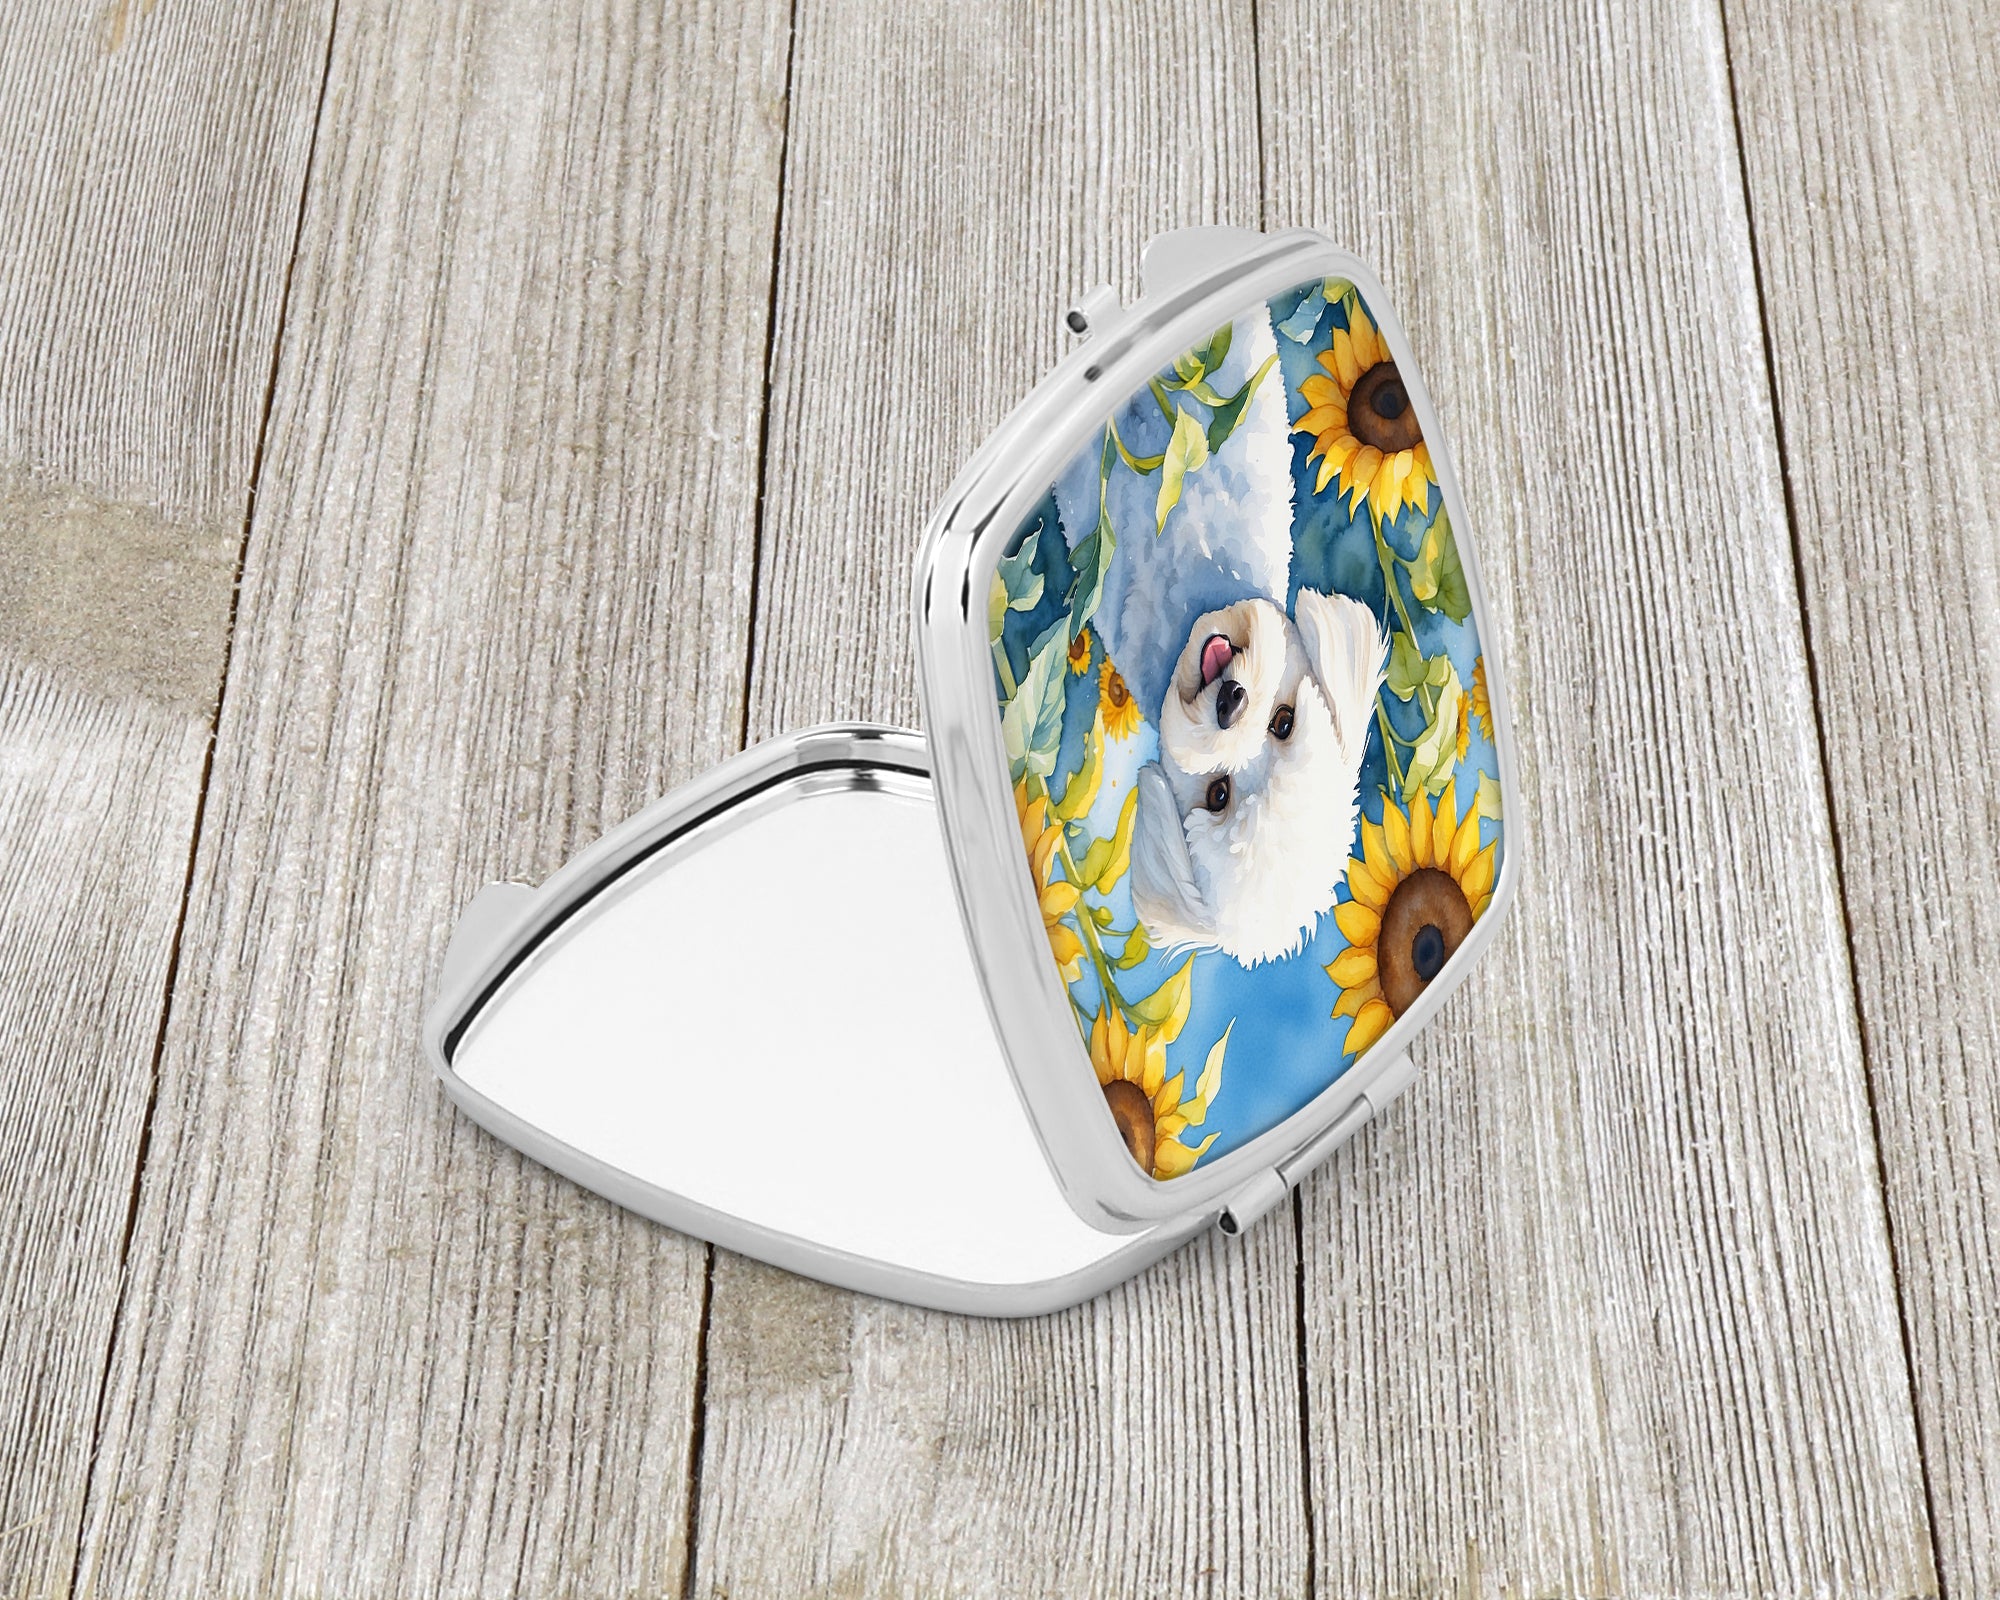 Buy this Bichon Frise in Sunflowers Compact Mirror